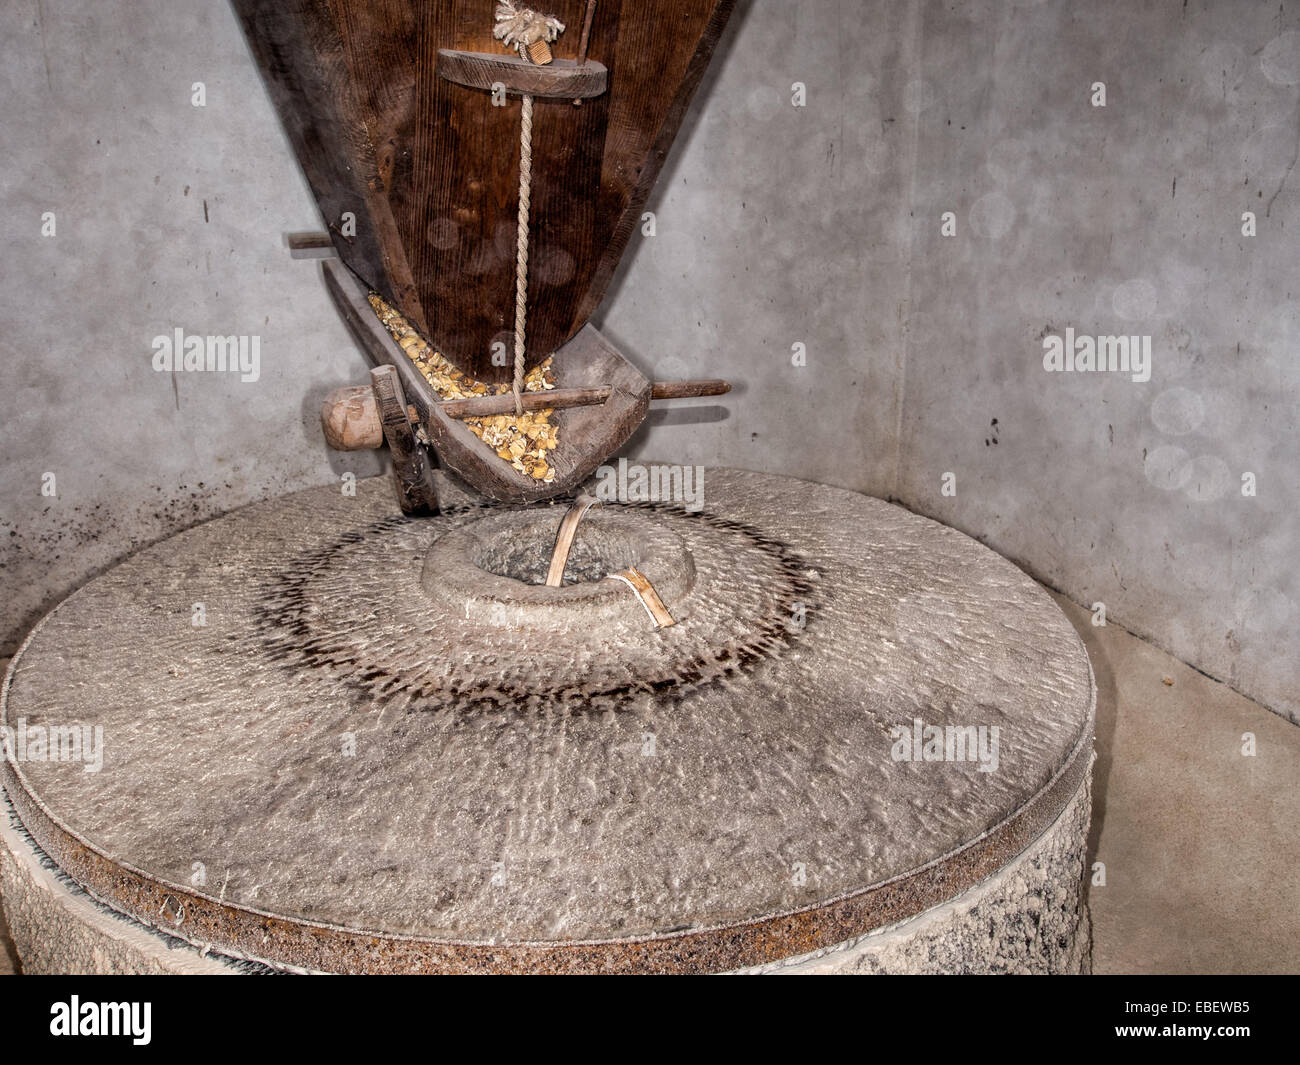 Milling flour from sweet chestnuts. Note - the air is filled with flour, the millstone revolving and the chestnuts being shaken. Stock Photo